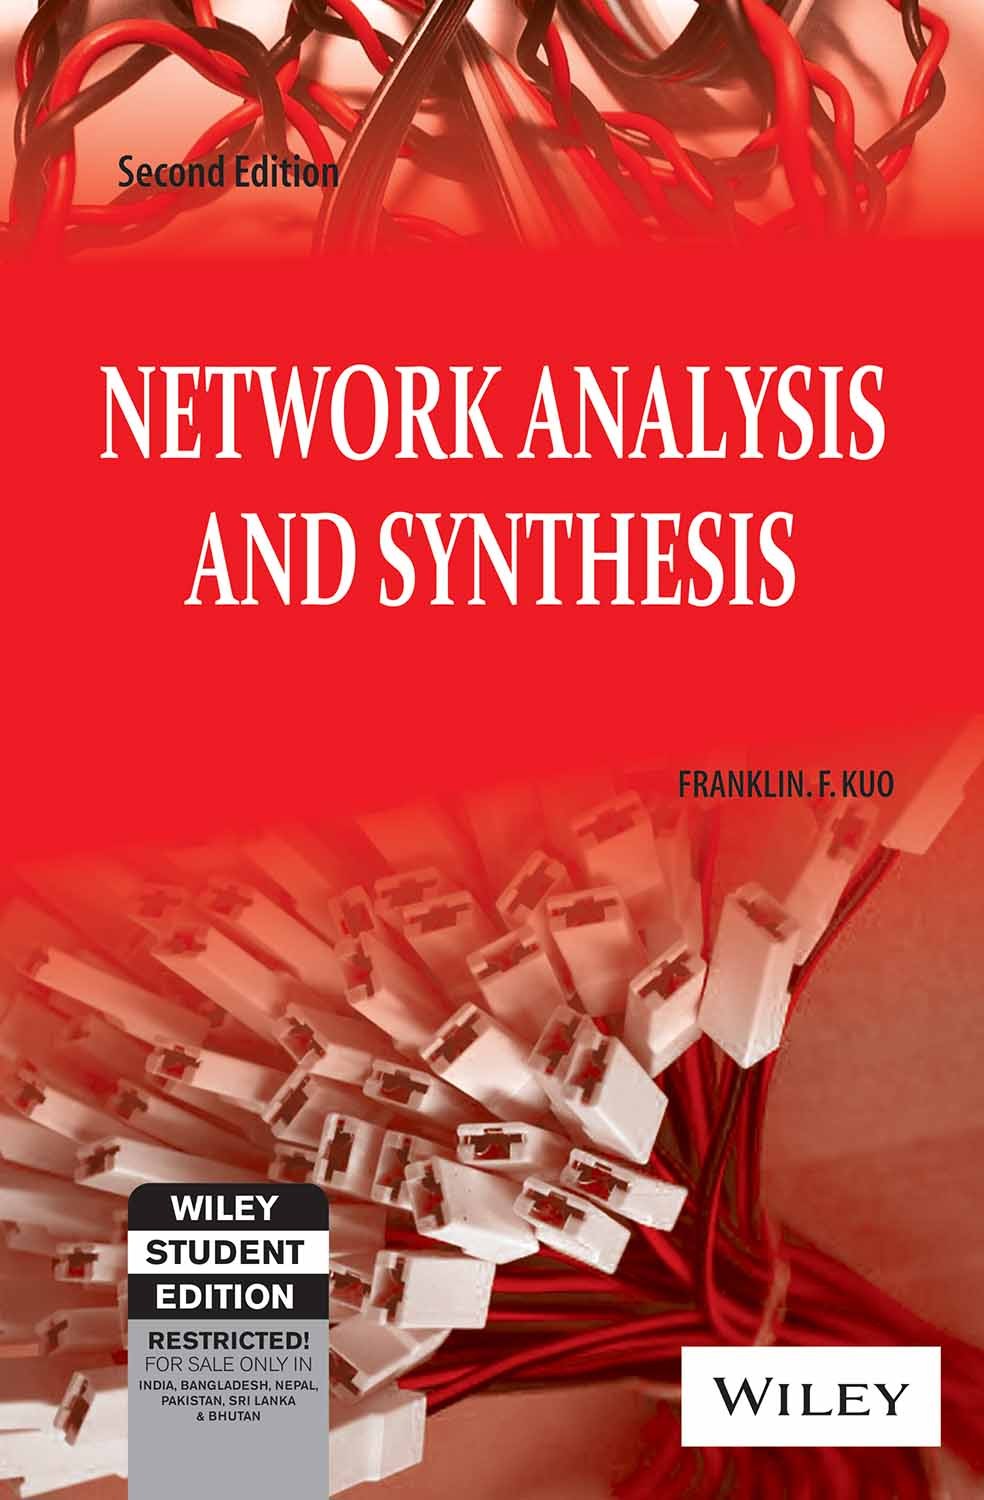 network analysis synthesis franklin f kuo free download, network analysis and synthesis franklin f kuo solutions download, network analysis and synthesis franklin f kuo solutions download pdf, network analysis and synthesis franklin f kuo solutions pdf, network analysis and synthesis franklin f kuo pdf download, network analysis and synthesis franklin f kuo download, network analysis and synthesis by franklin f kuo free, solution manual network analysis and synthesis franklin f kuo, solution manual network analysis and synthesis franklin f kuo pdf, franklin f kuo network analysis and synthesis wiley toppan, network analysis and synthesis franklin f kuo pdf, network analysis & synthesis by franklin f. kuo, network analysis and synthesis by franklin f kuo solutions, network analysis and synthesis by franklin f kuo pdf download, download network analysis and synthesis by franklin f kuo, solution manual of network analysis and synthesis by franklin f kuo, solution manual of network analysis and synthesis by franklin f kuo pdf, network analysis and synthesis franklin f kuo download pdf, network analysis and synthesis by franklin f kuo ebook download, solution of network analysis and synthesis by franklin f kuo, network analysis and synthesis franklin f kuo 2nd edition pdf